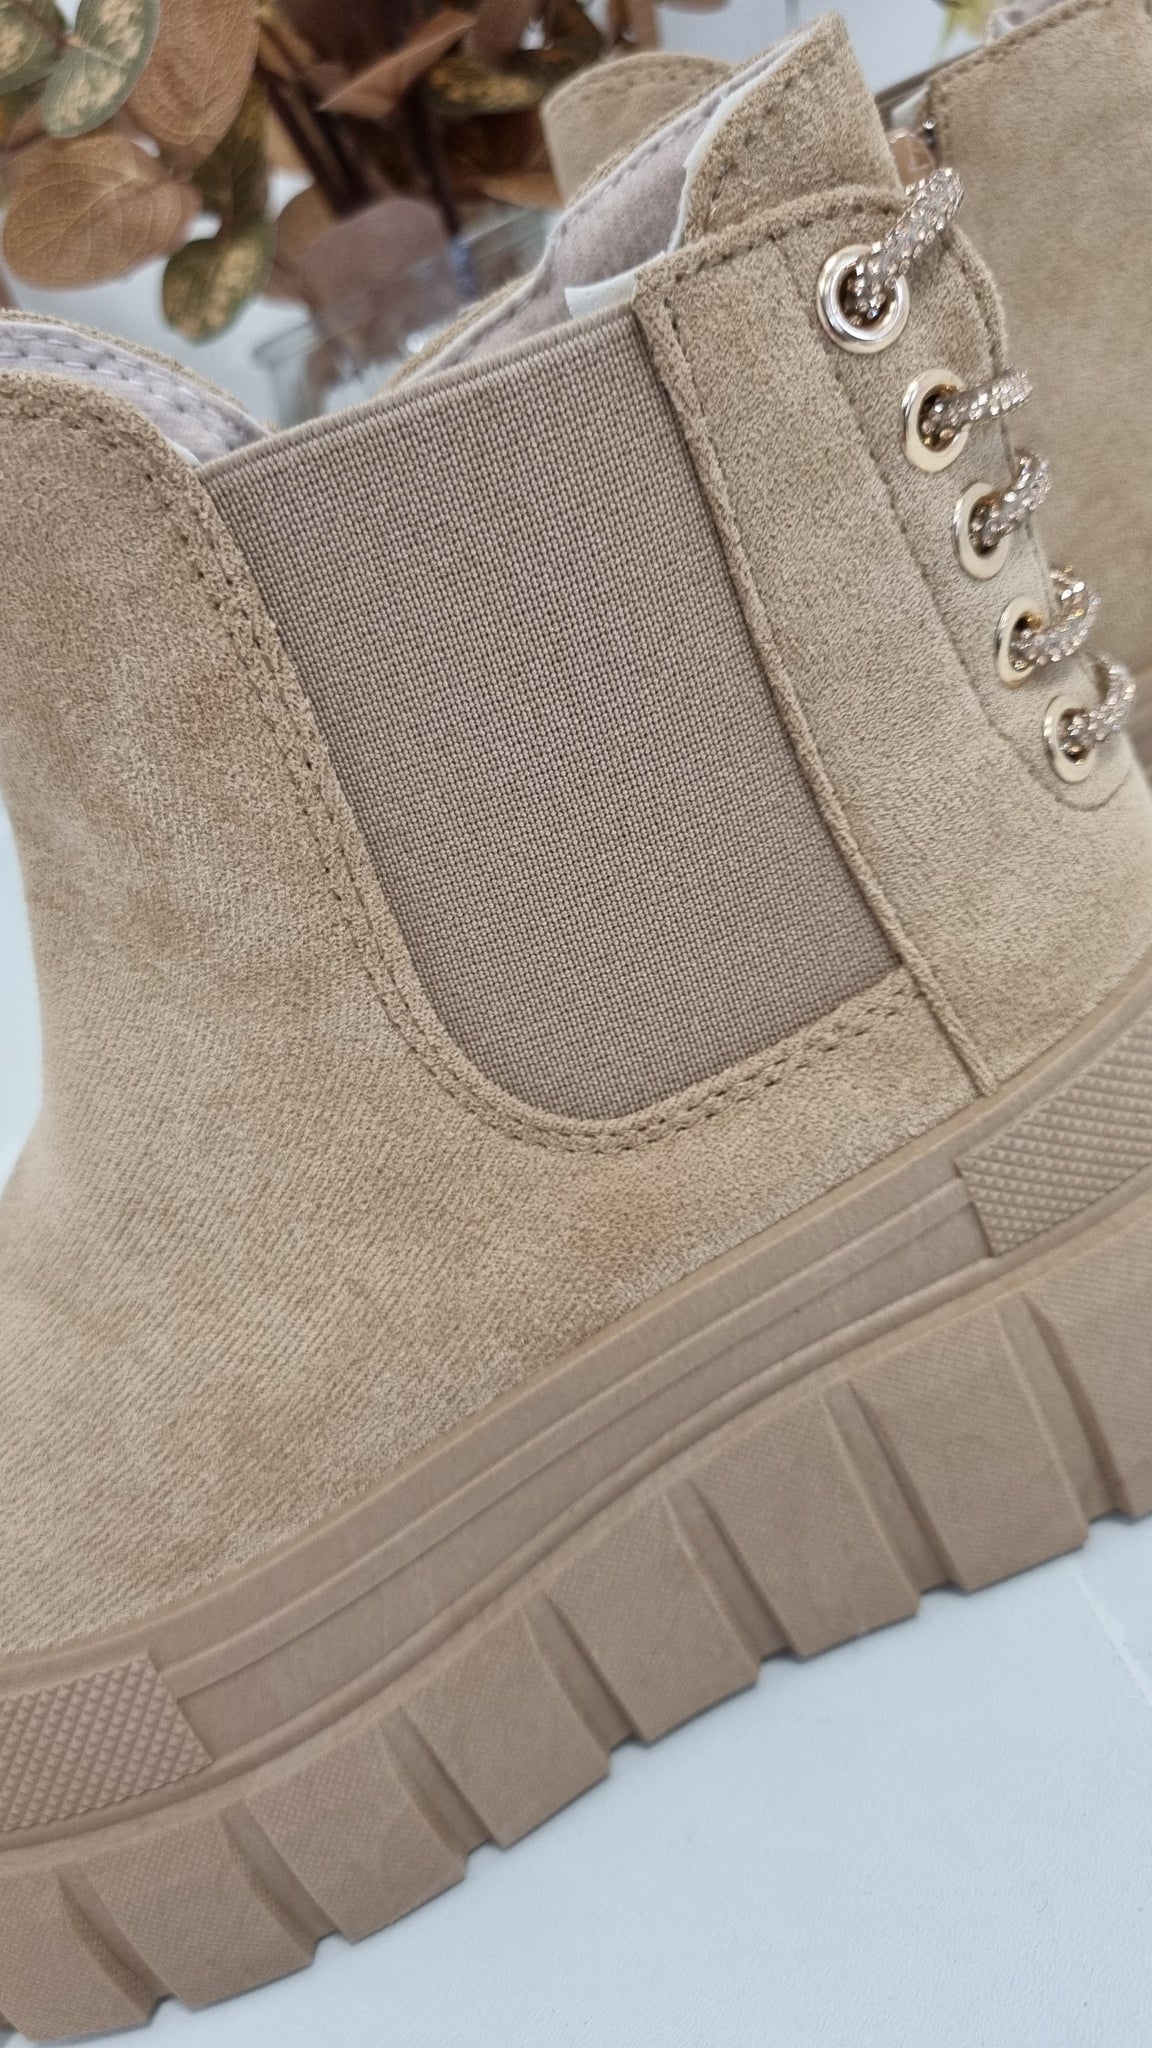 Kensington Chunky Cleated Sole Boot - Camel